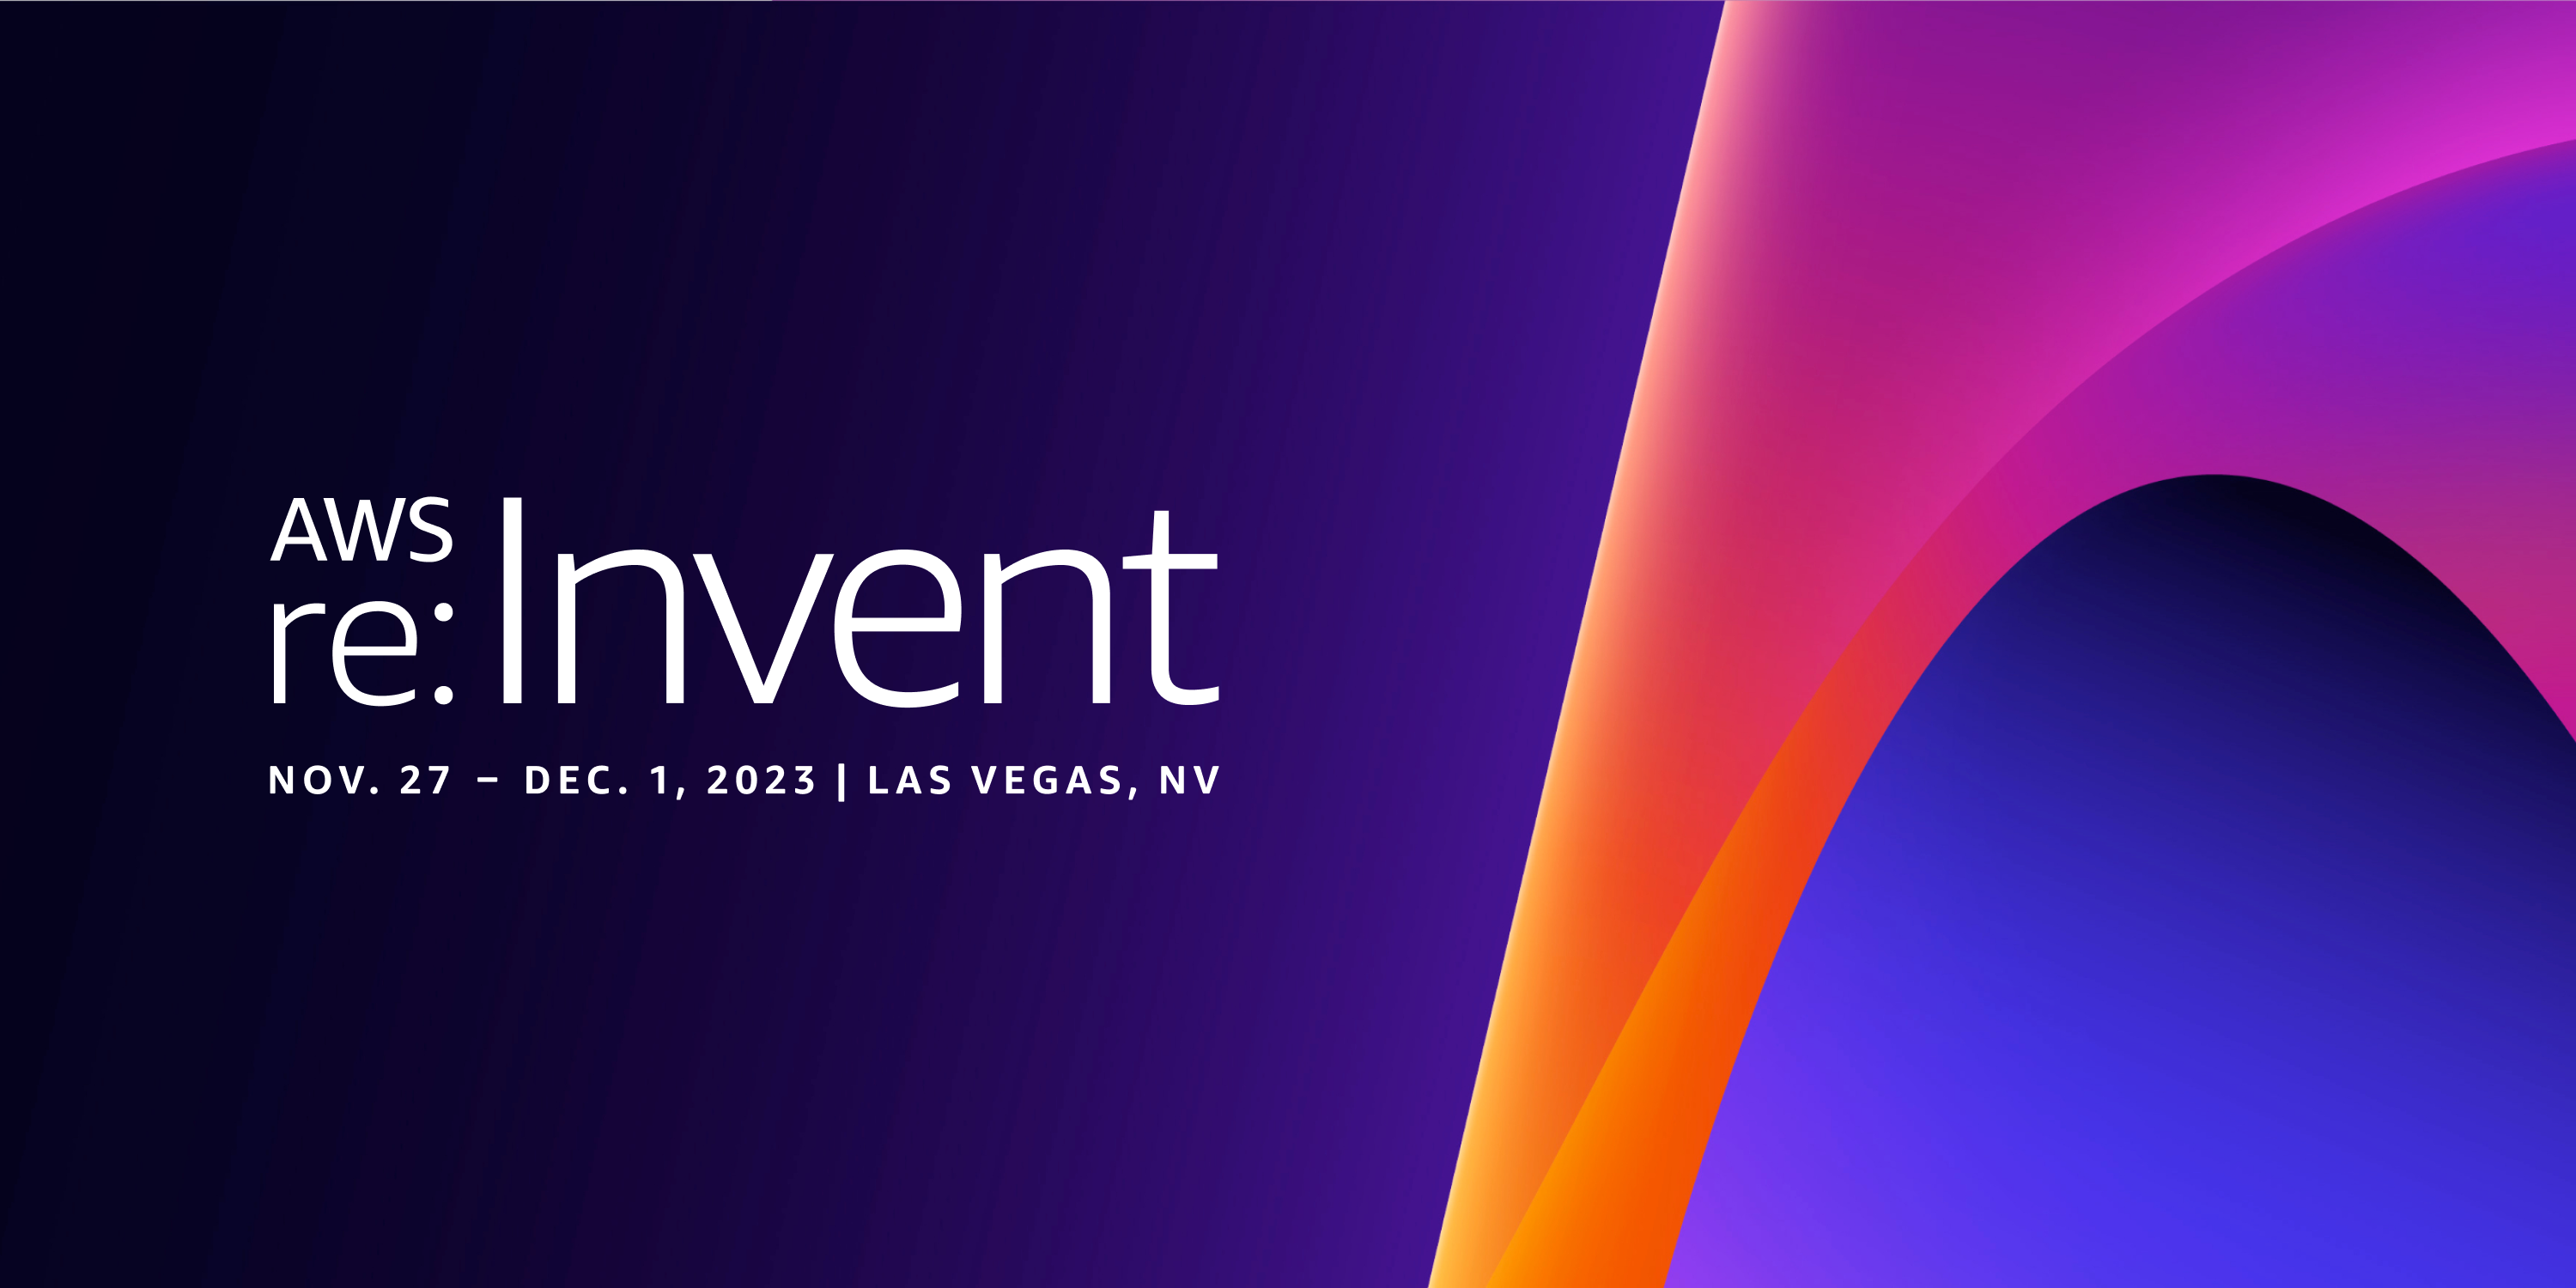 AWS re:Invent Live: All About the 2023 Edition